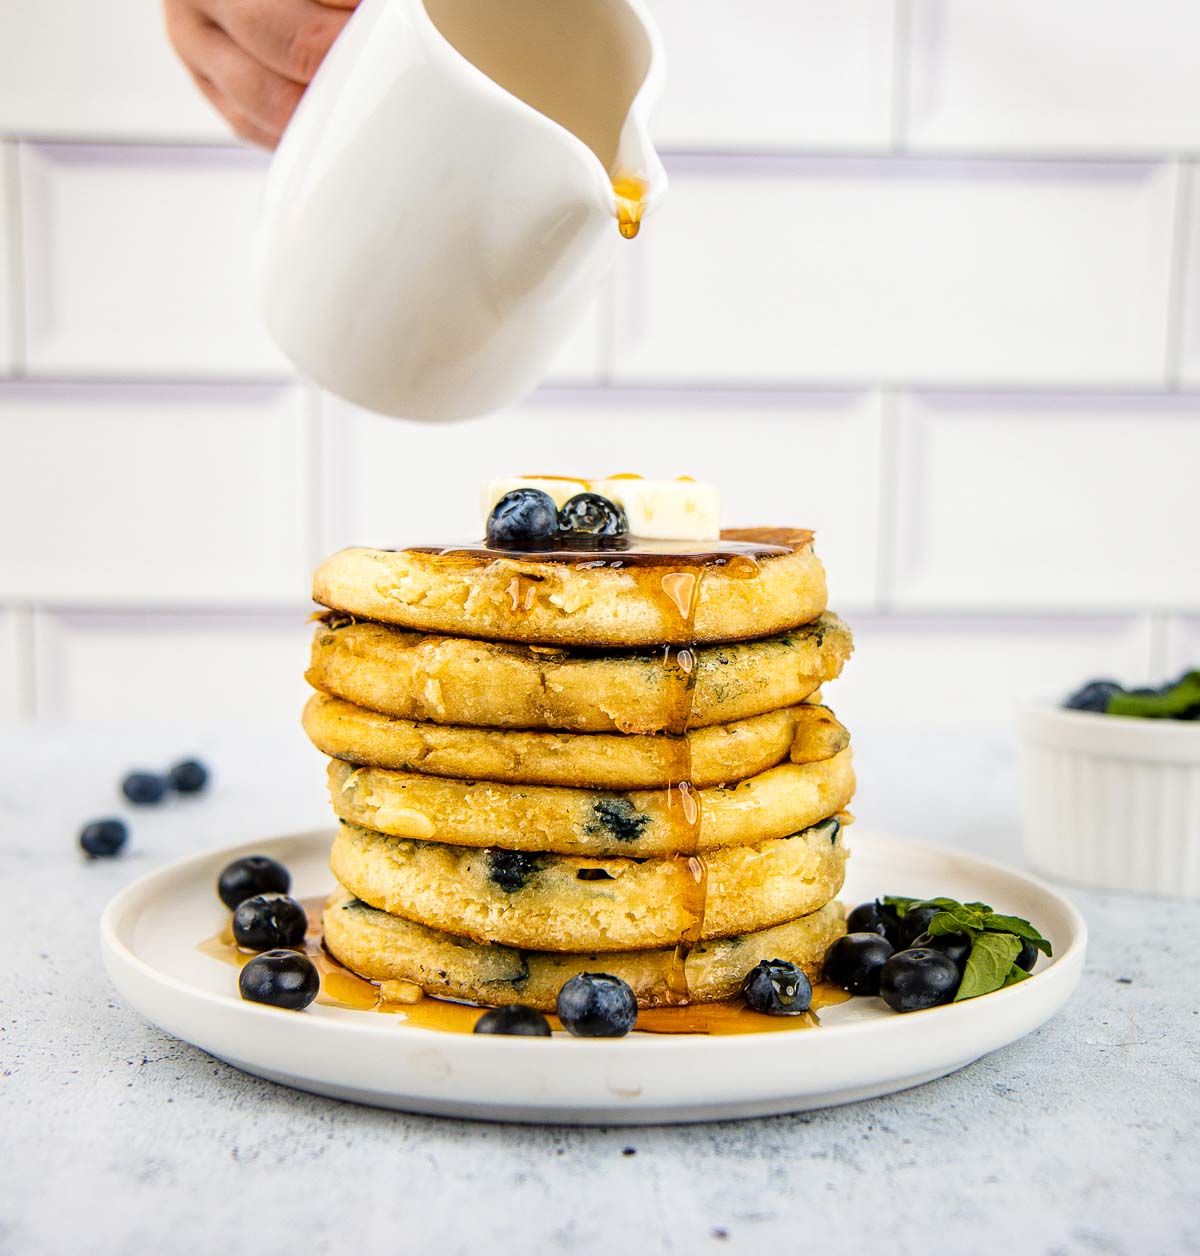 Maple syrup runs down the side of a stack of 6 fluffy blueberry pancakes.